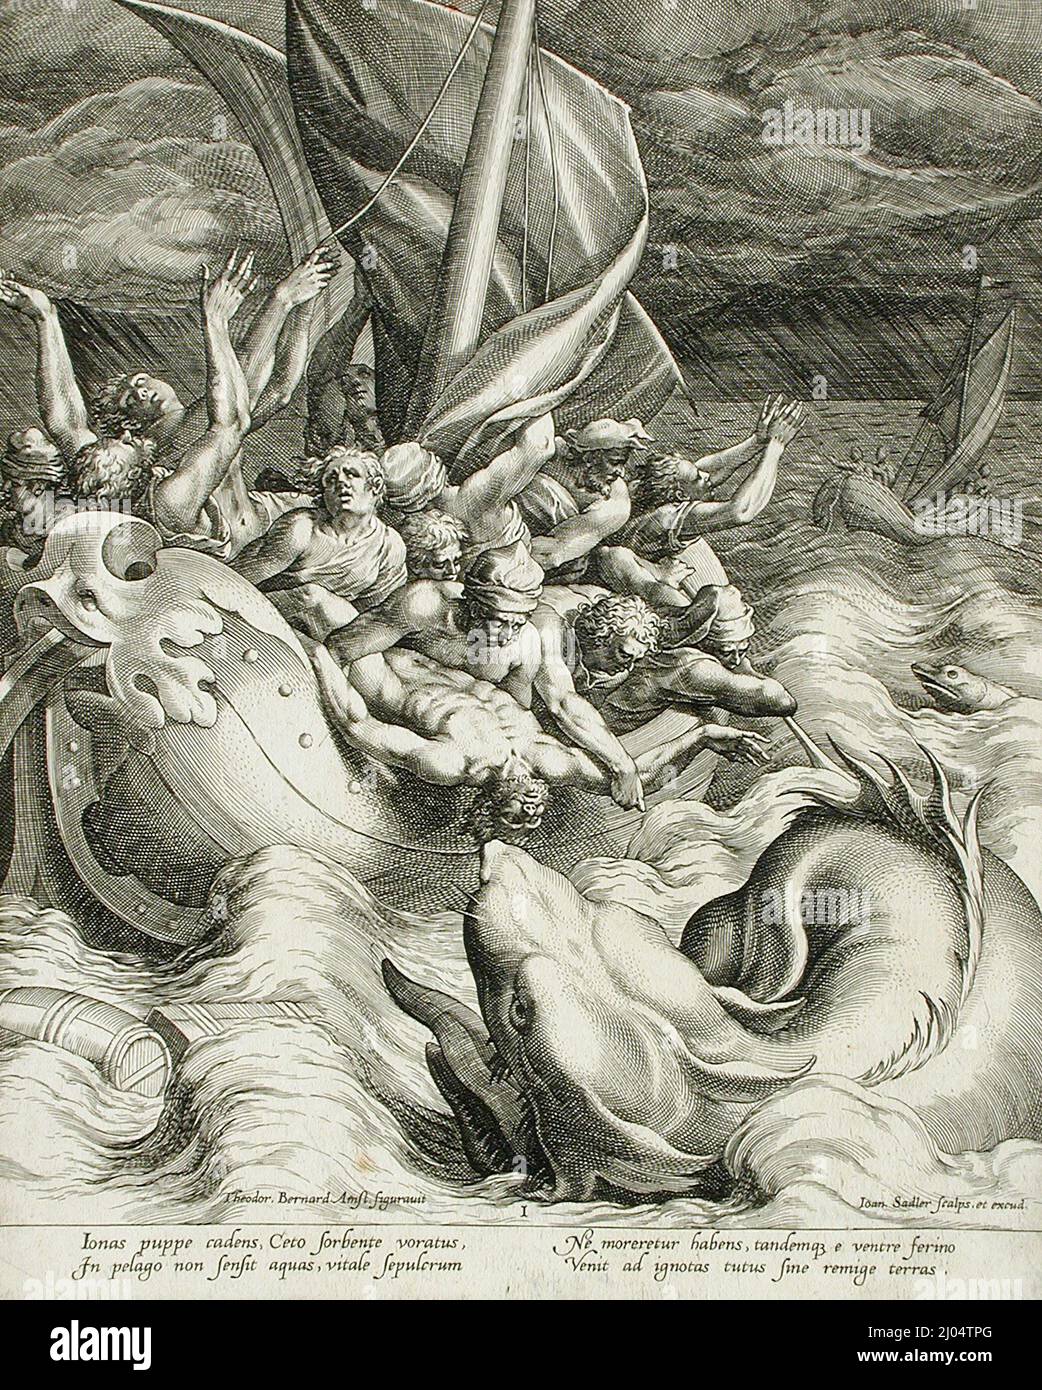 Jonah Thrown to the Whale. Johannes Sadeler I (Flanders, Brussels, 1550-circa 1600). Flanders, circa 1582. Prints; engravings. Engraving, laid down Stock Photo